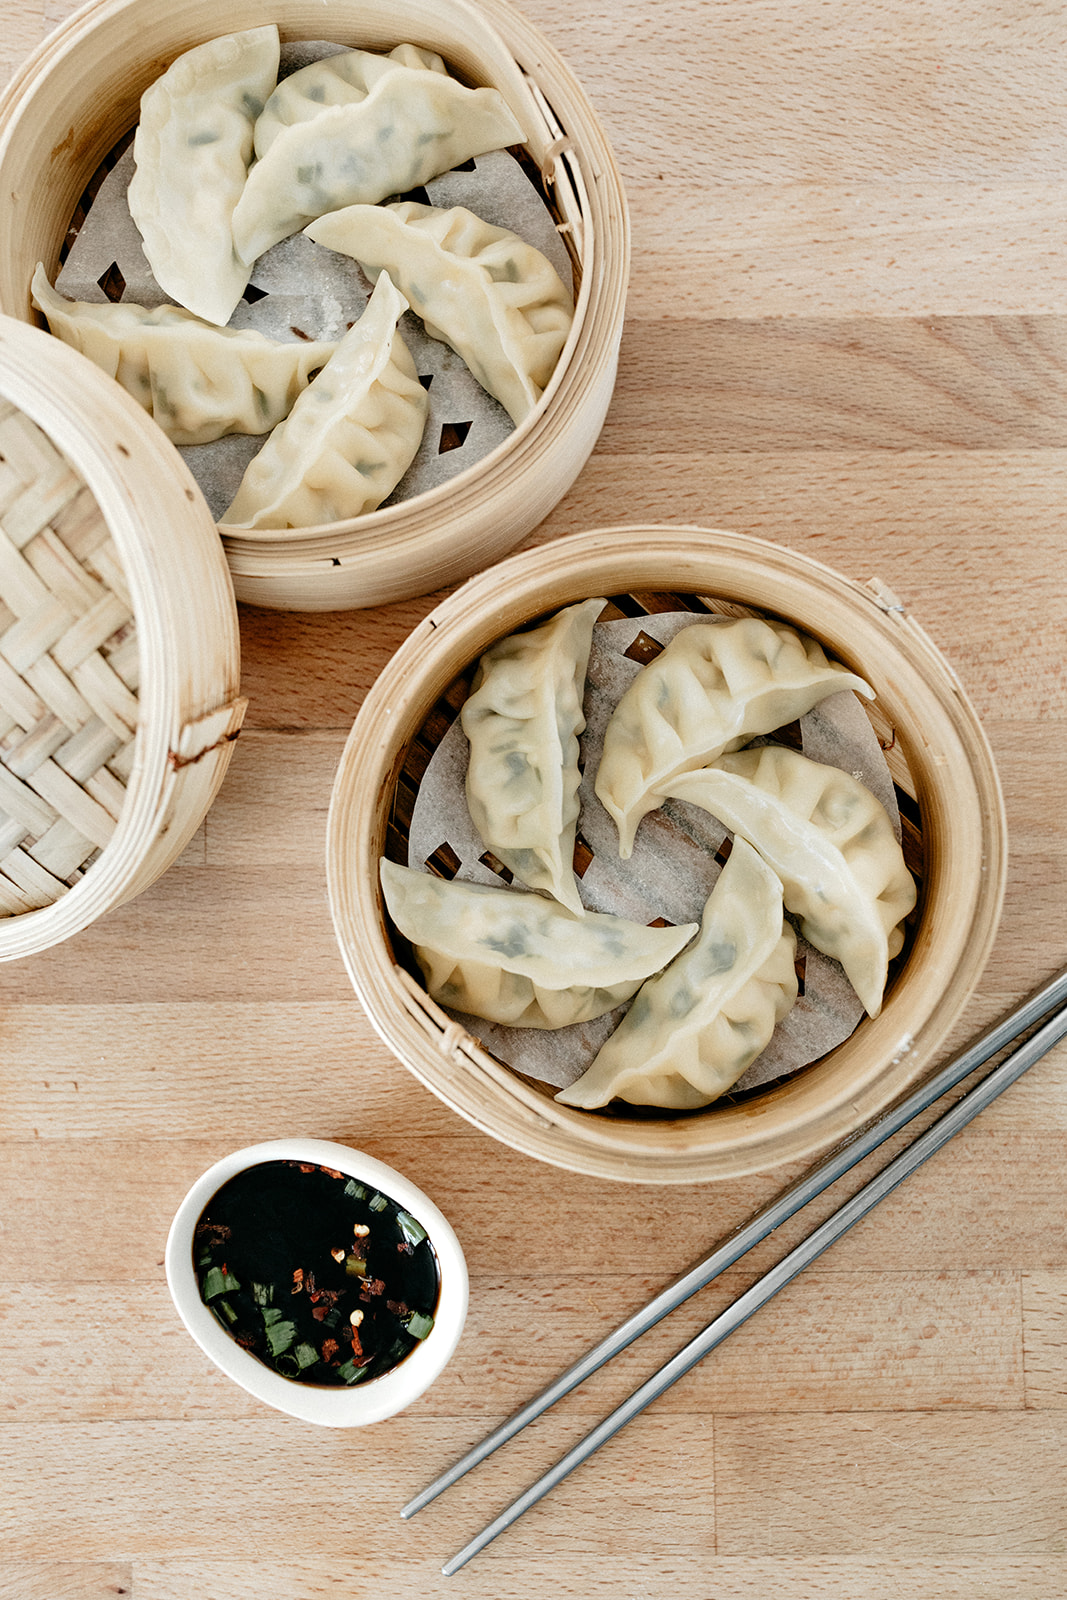 3-6-19-molly-yeh-egg-&-chive-potstickers-7.jpg